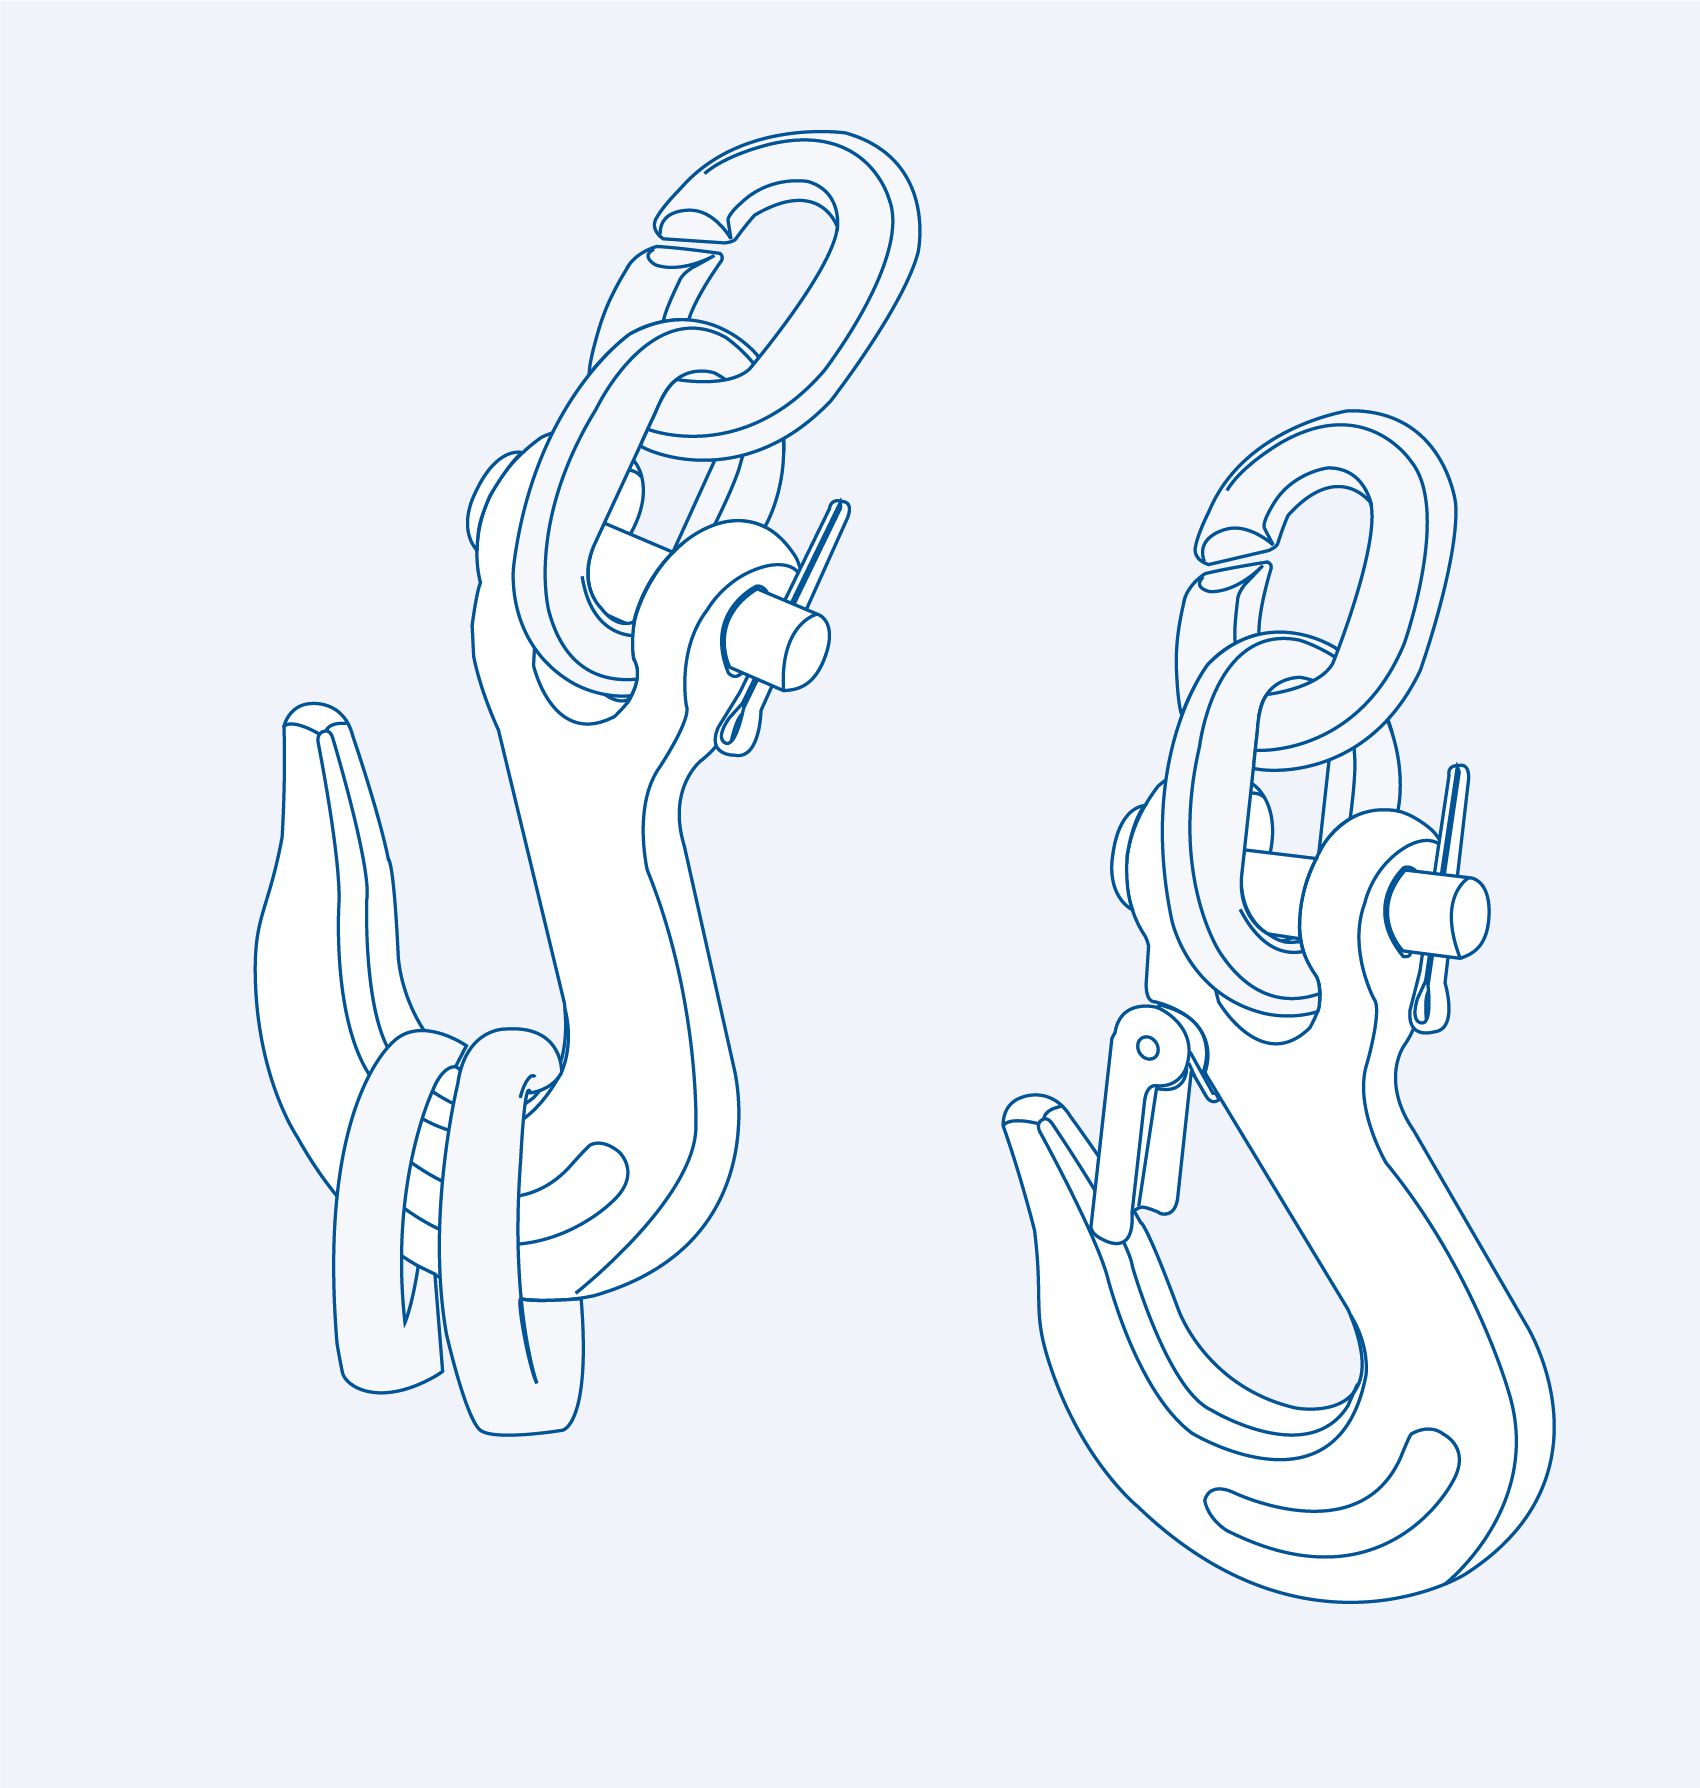 S331X Slip hook (clevis end with safety latch) - 316